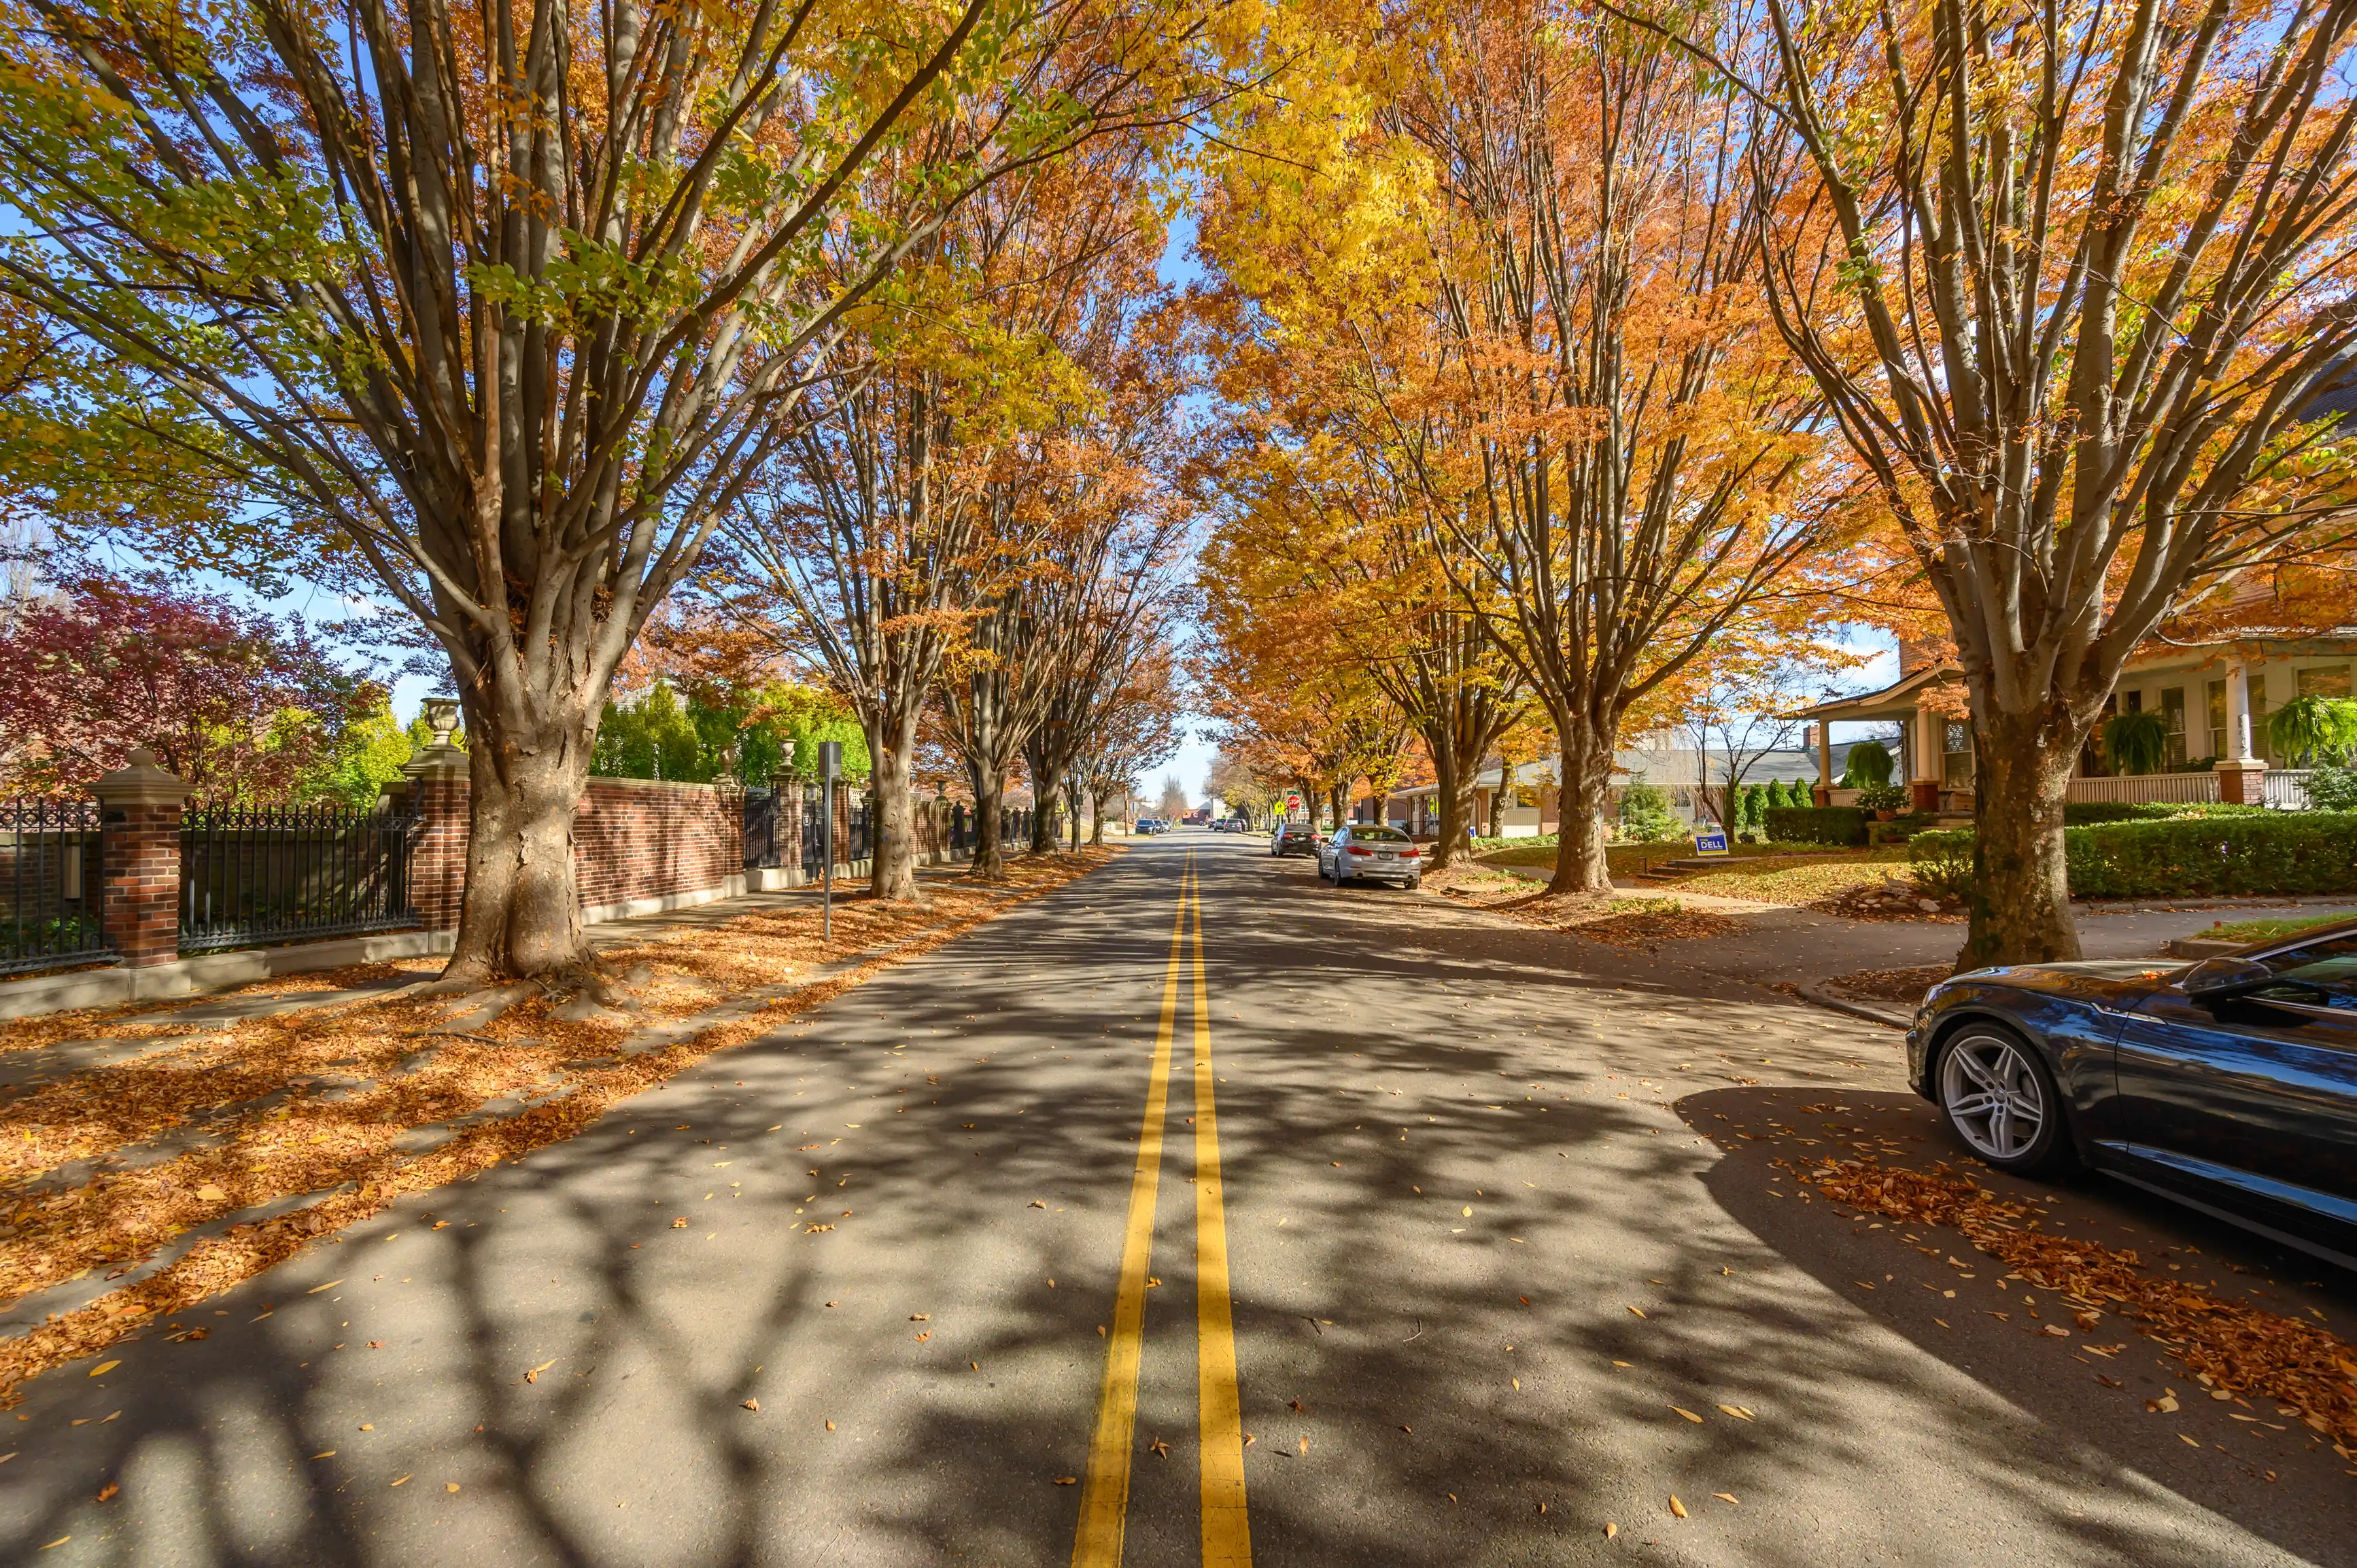 Tree-lined street with autumn leaves, parked cars, and a clear blue sky.